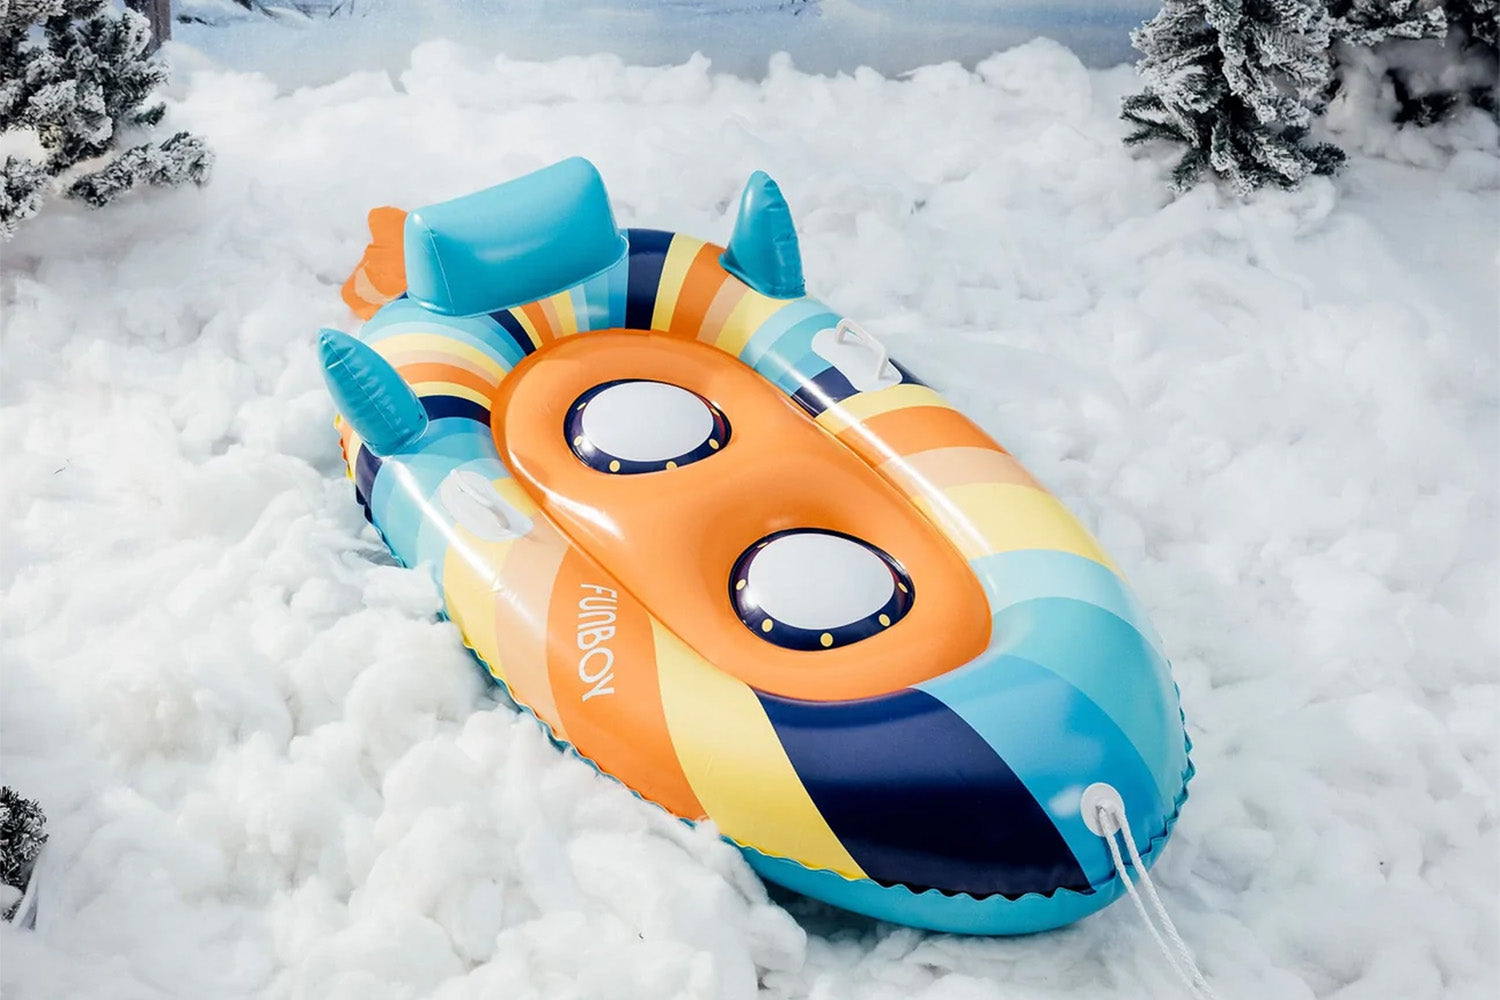 Snow Tubing in Colorado: 11 of the Best Places To Do It